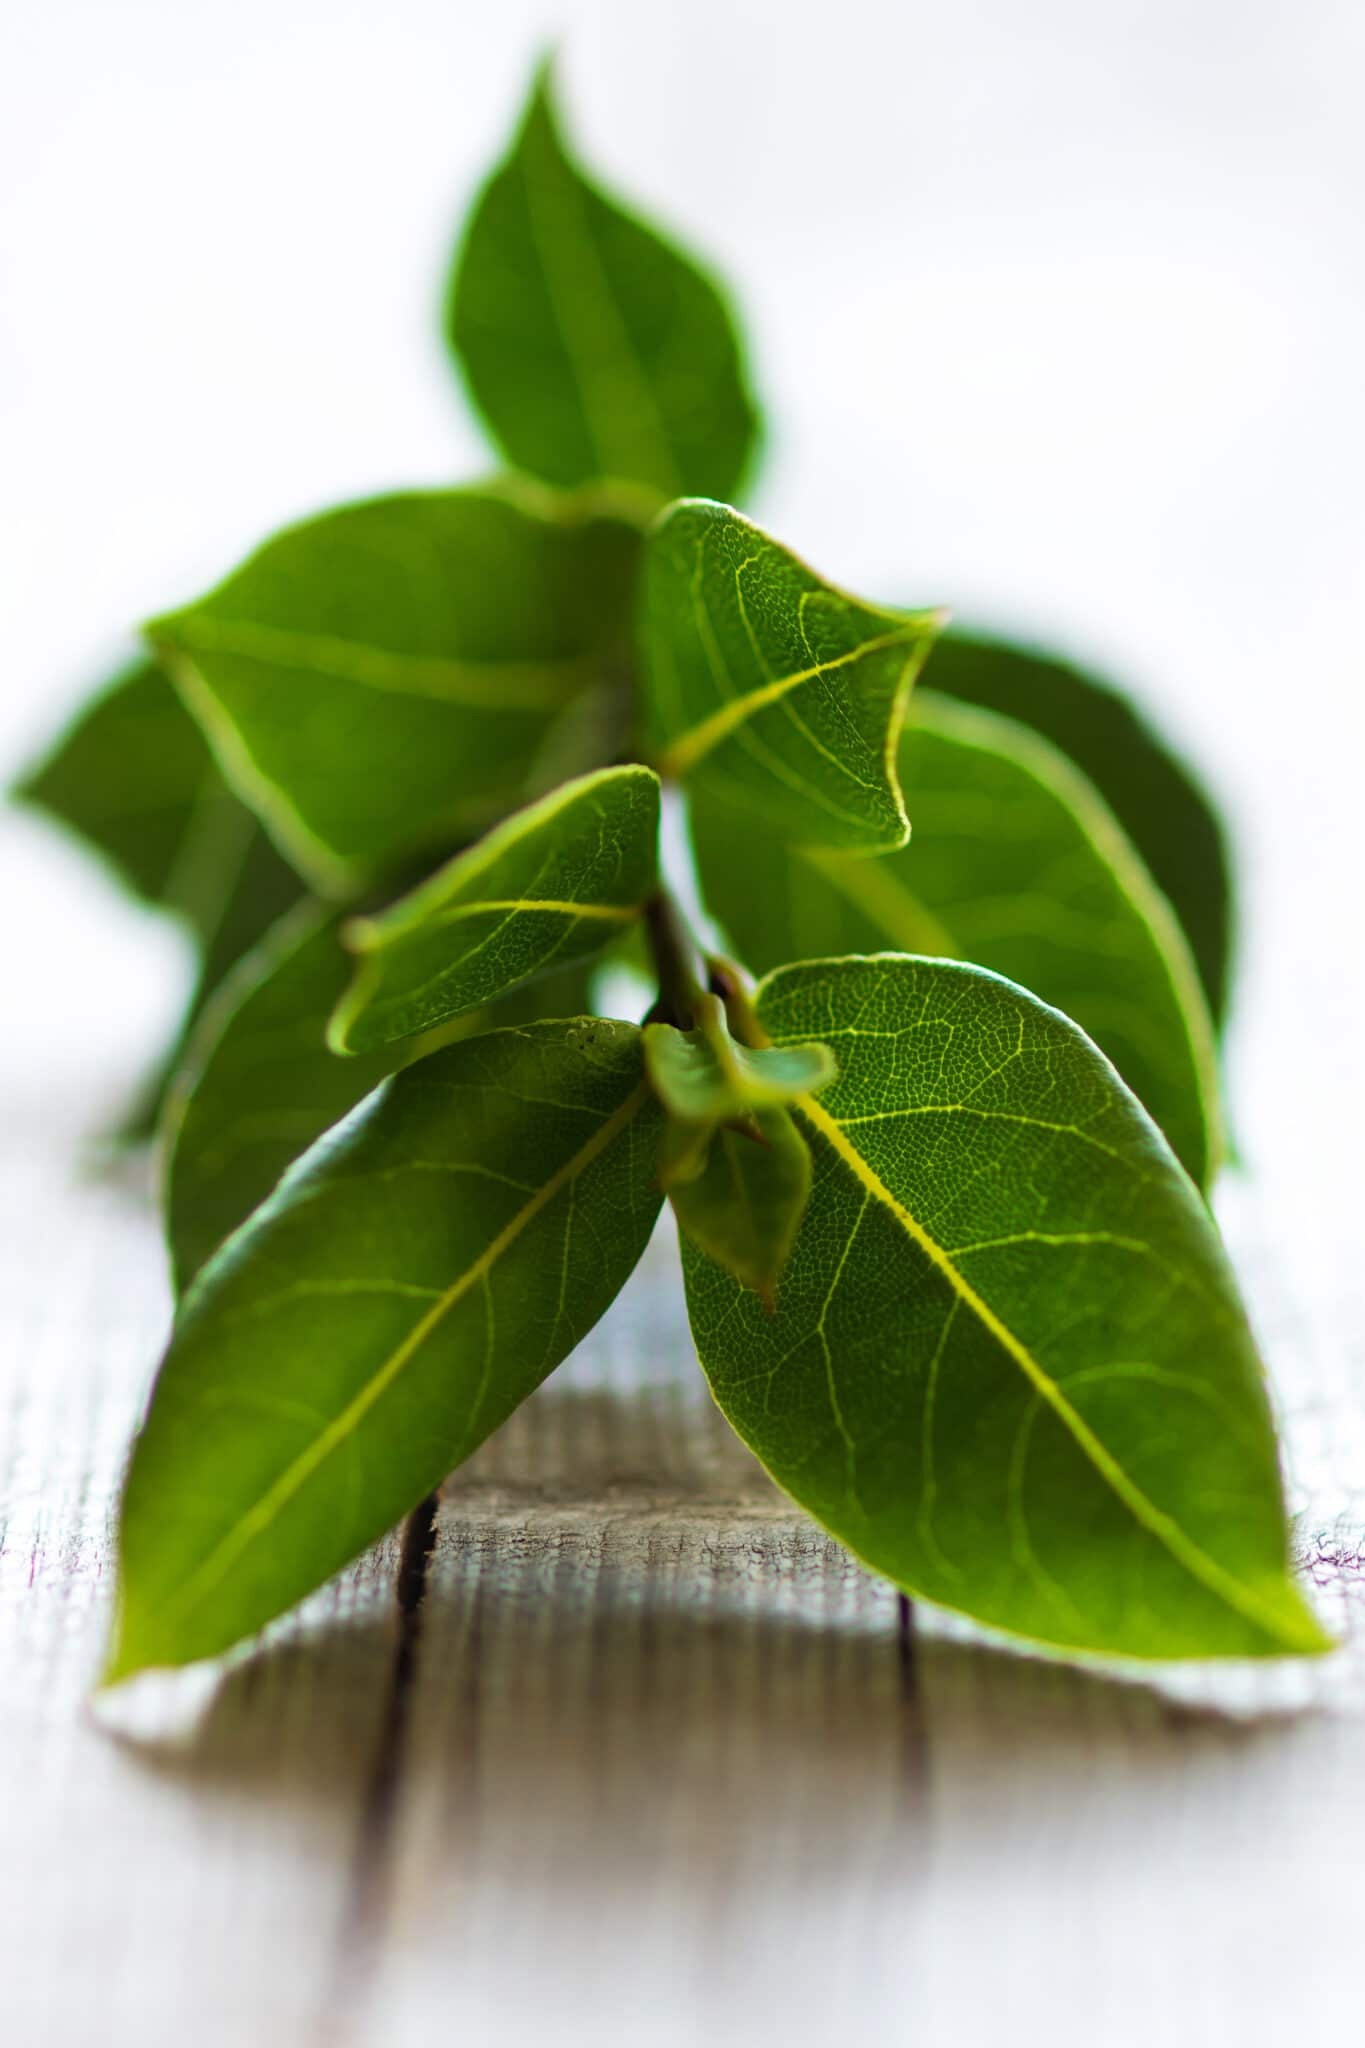 HD wallpaper, Usage, Phone Hd Bay Leaves Background Image, 1370X2050 Hd Phone, Bay Leaves, Plant Growth, Harvesting